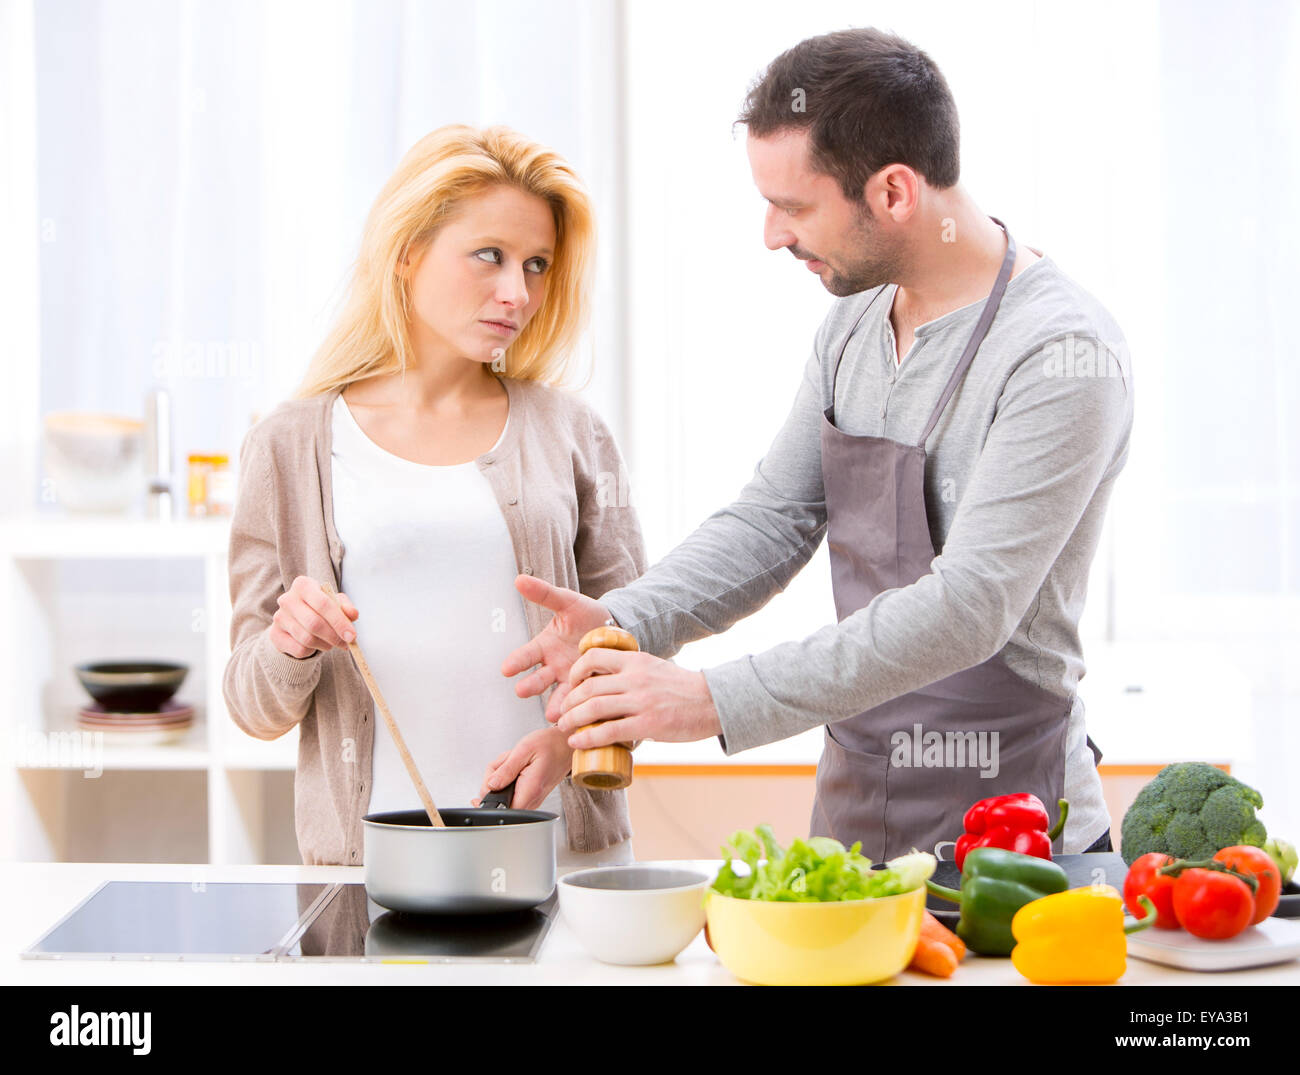 View of a Young attractive couple having an argue while cooking Stock Photo